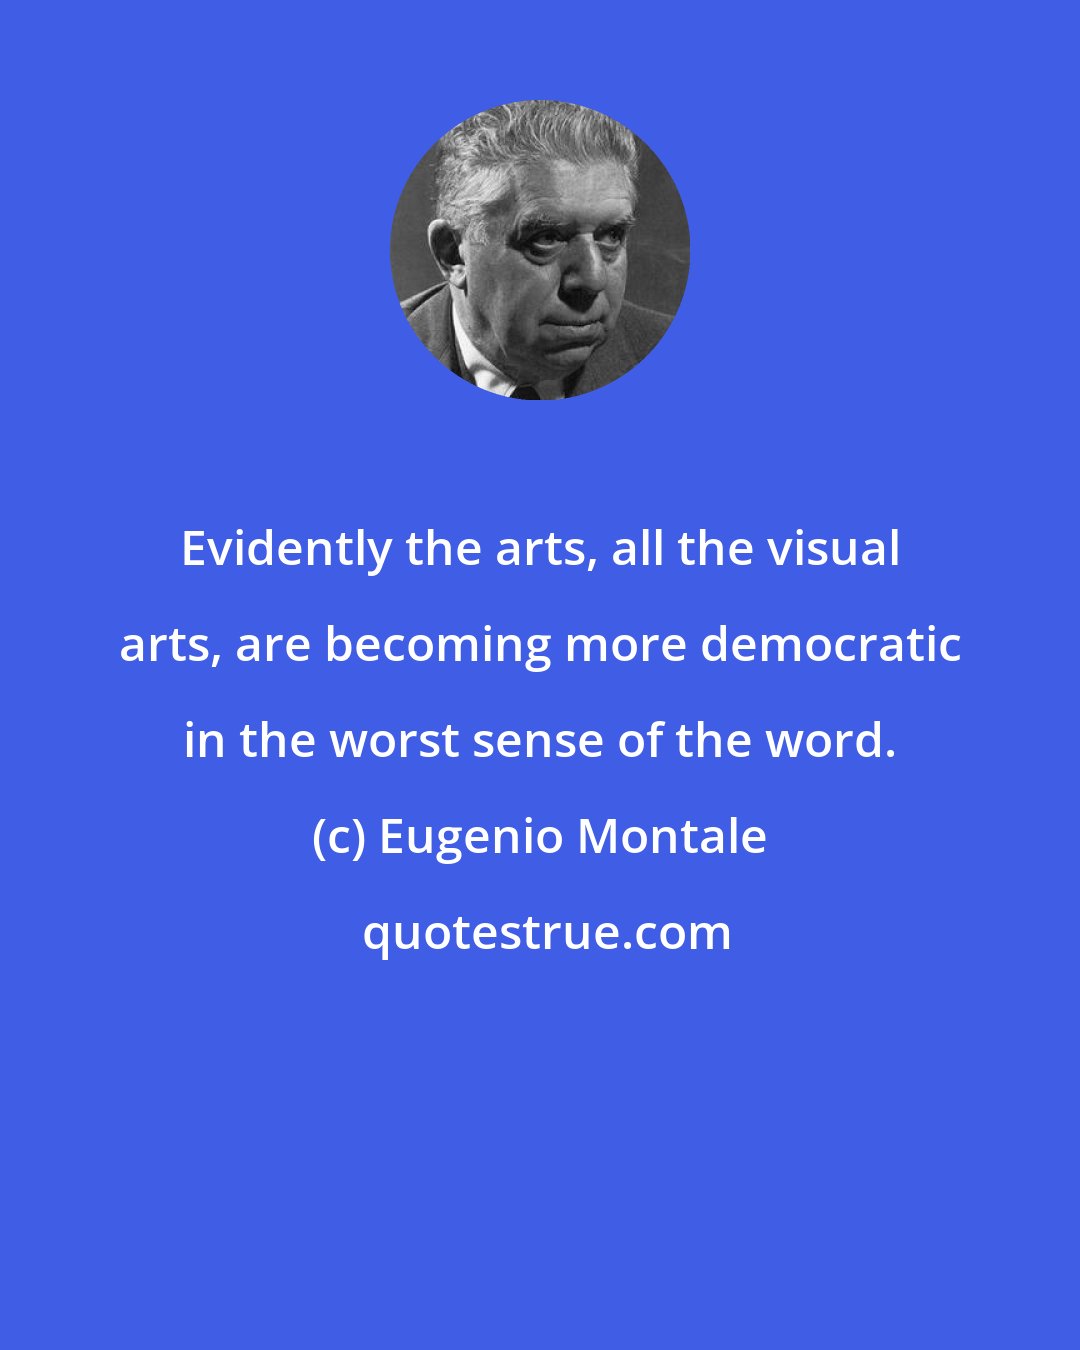 Eugenio Montale: Evidently the arts, all the visual arts, are becoming more democratic in the worst sense of the word.